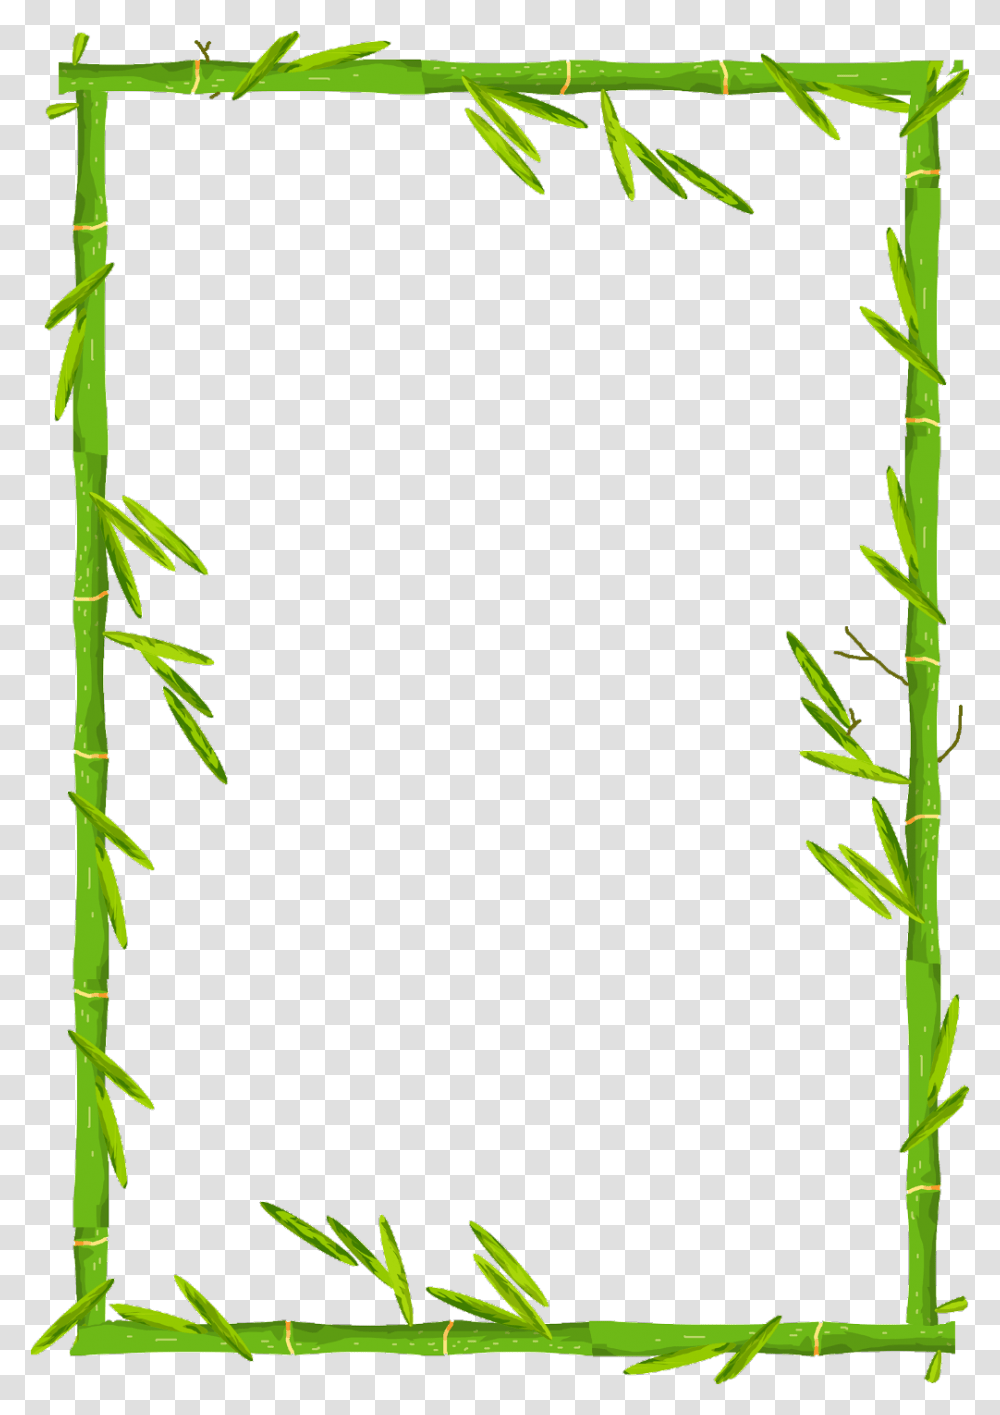 Ftestickers Bamboo Frame Borders Bamboo Border Frame Design, Plant, Bamboo Shoot, Vegetable Transparent Png